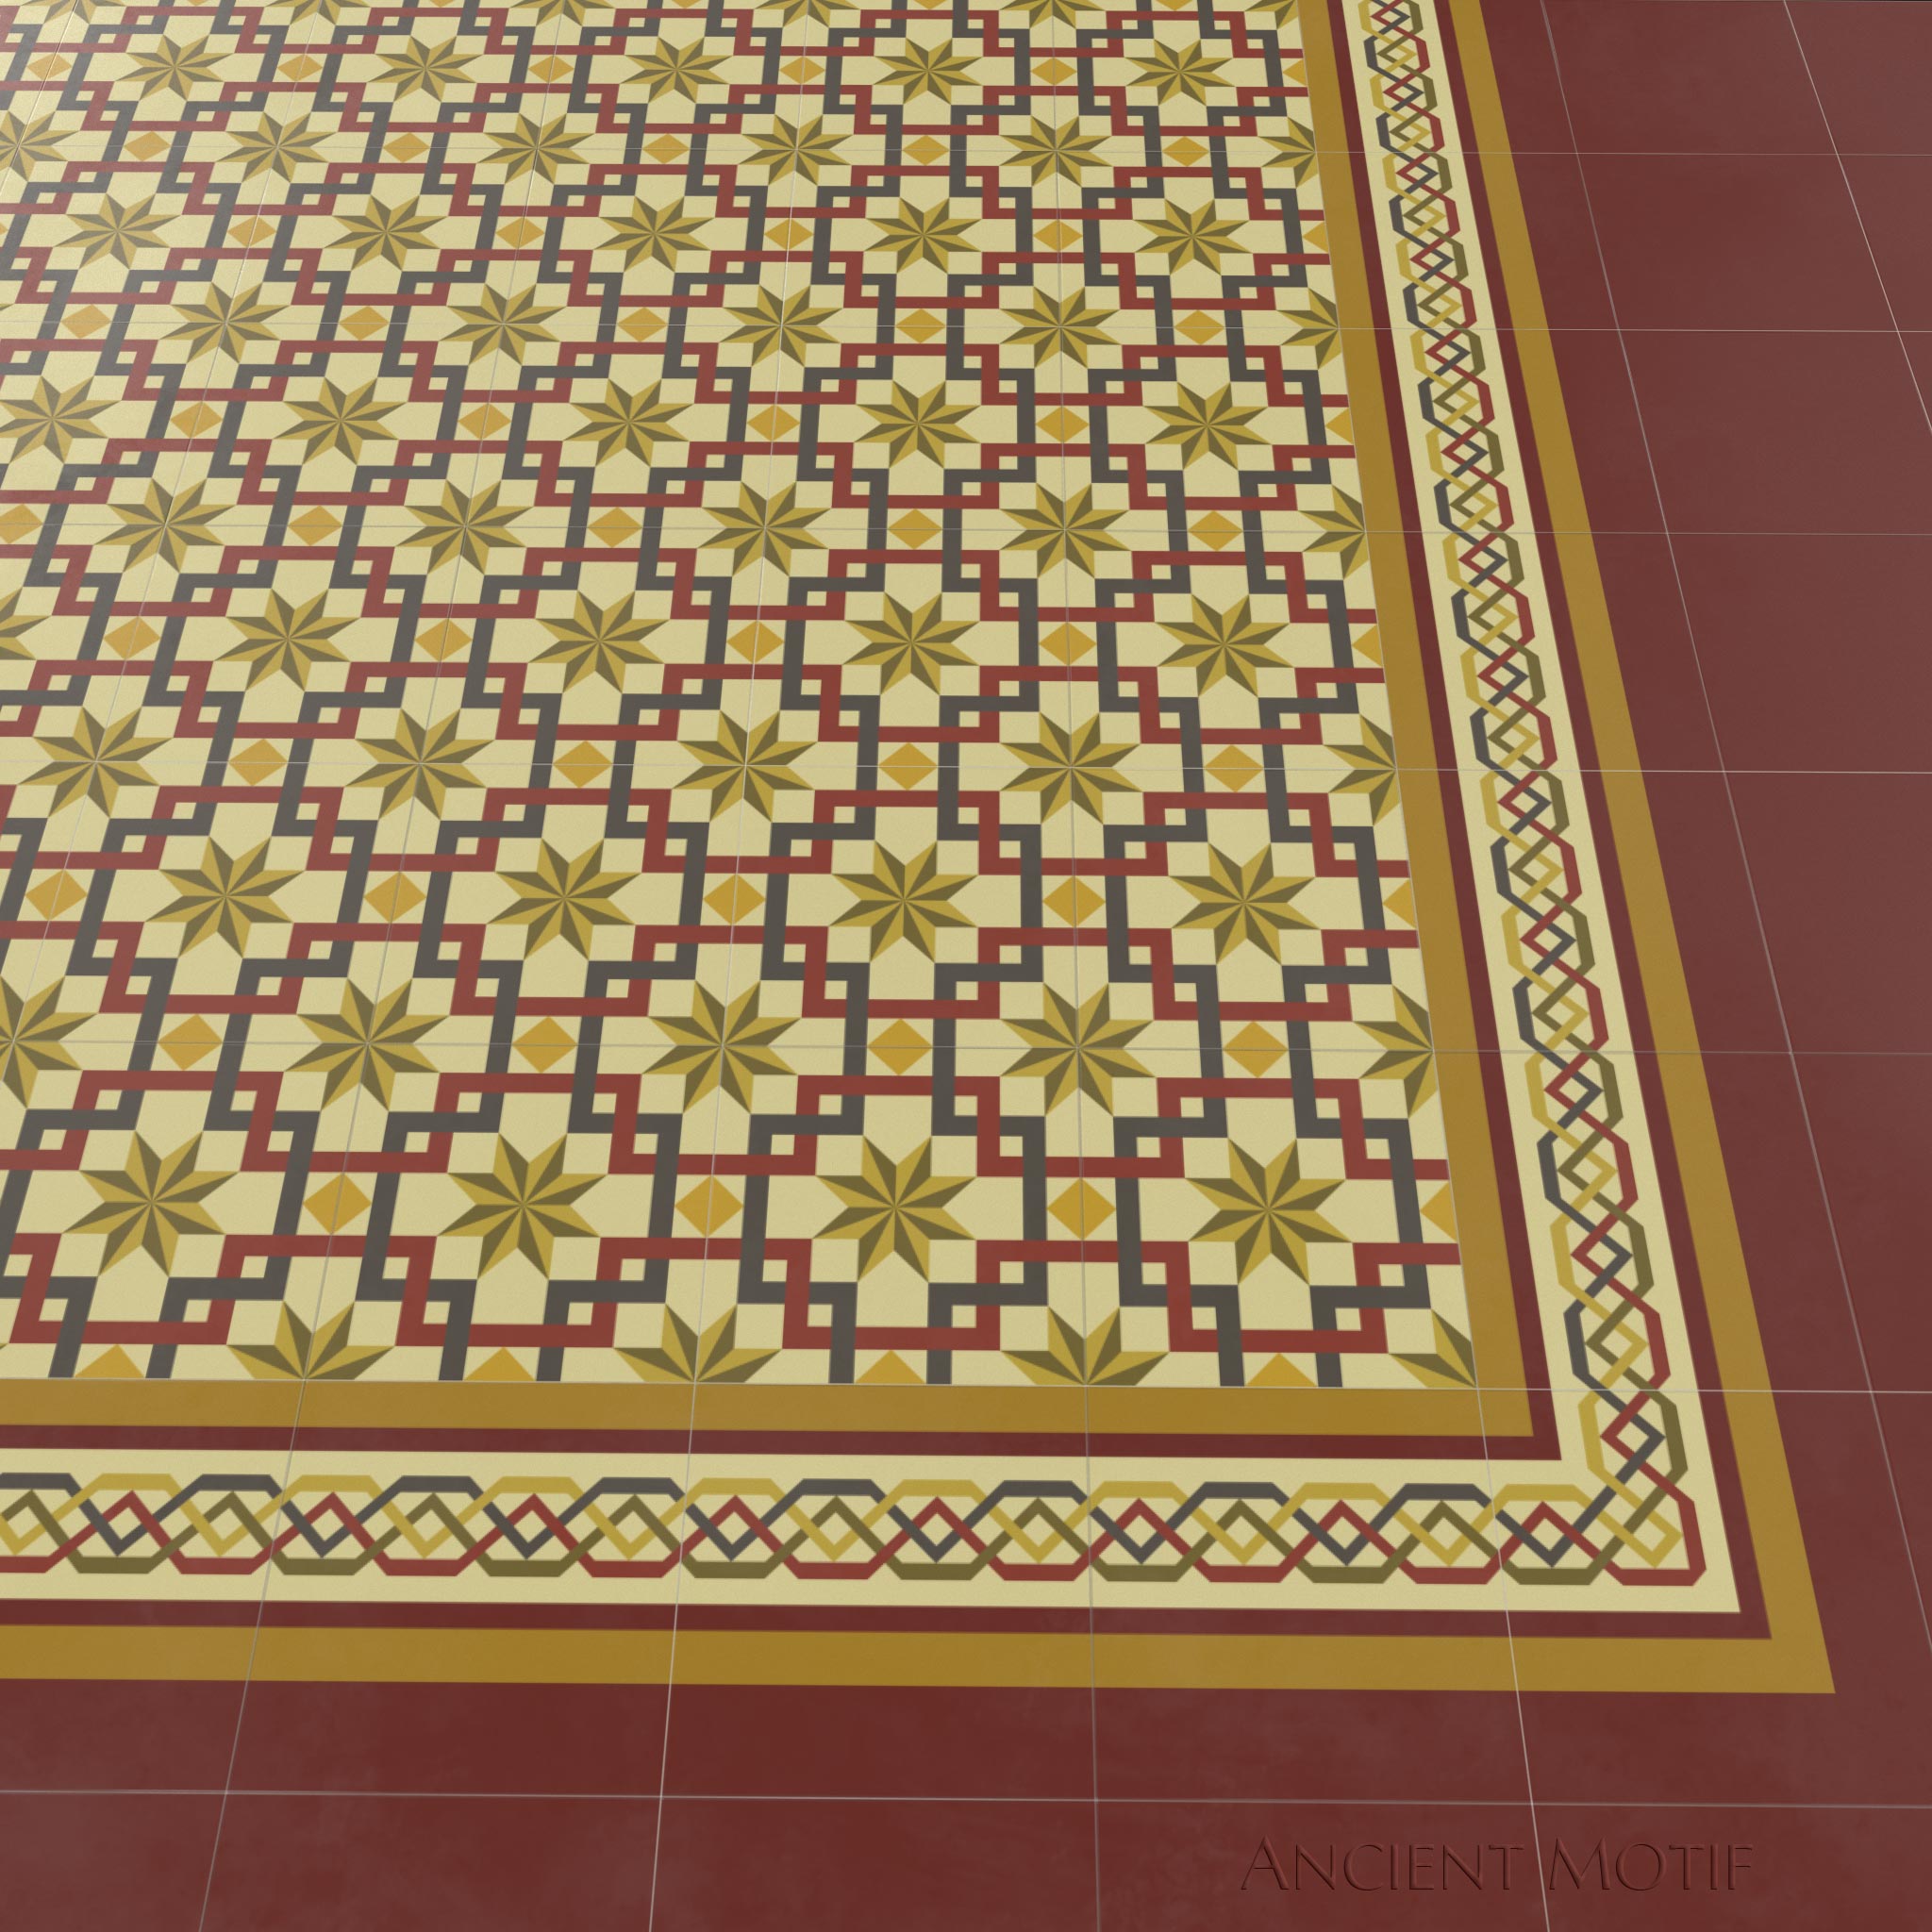 Andalusia Encaustic Cement Tile Floor in Burgundy, Goldenrod and Olive